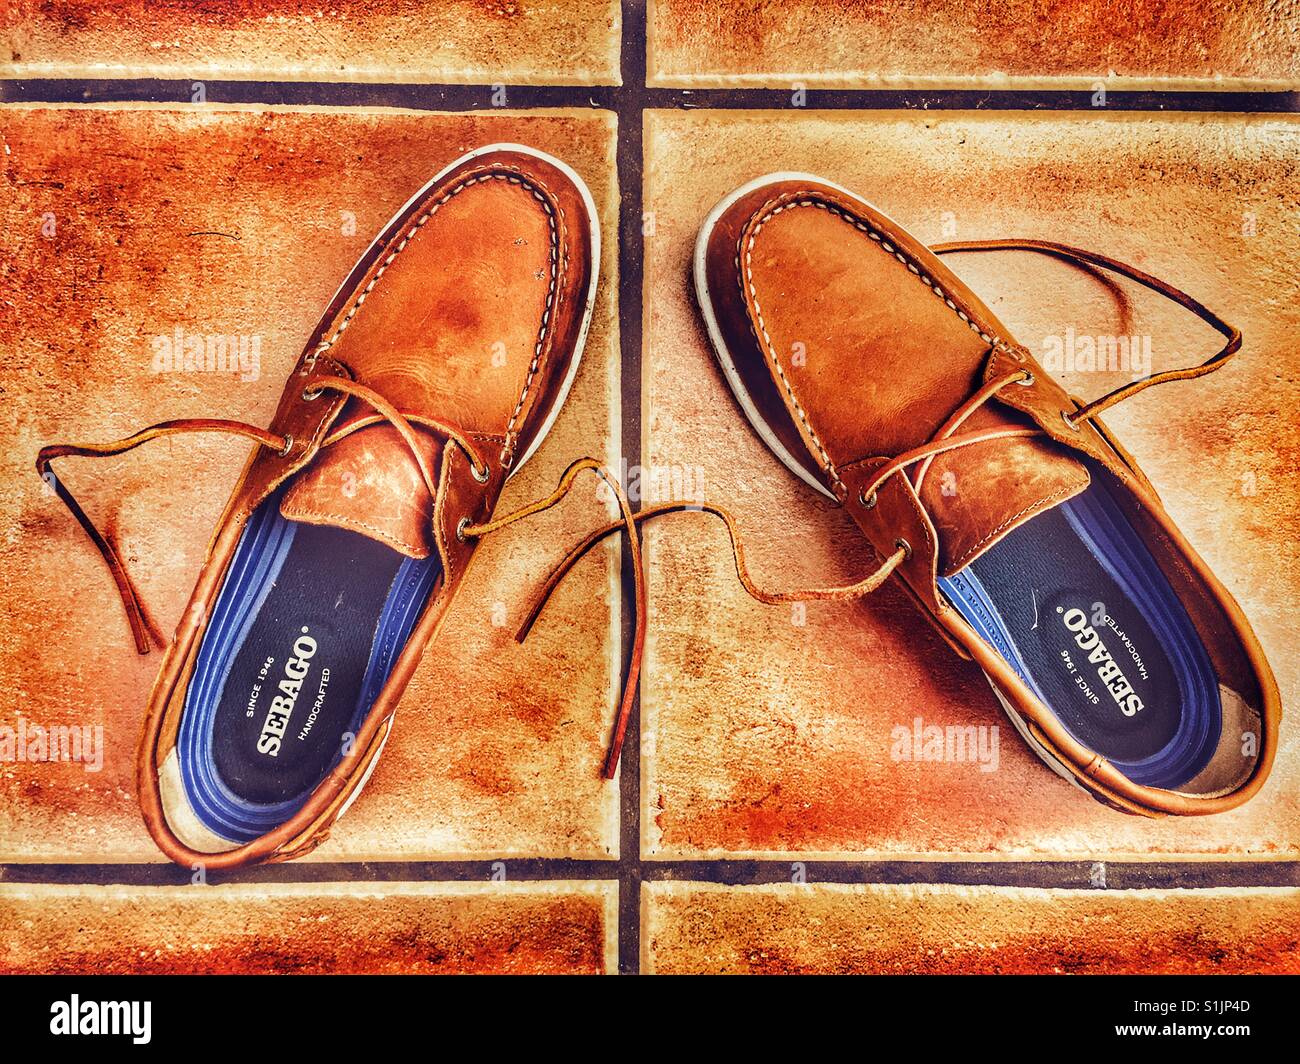 Deck Shoes High Resolution Stock Photography and Images - Alamy